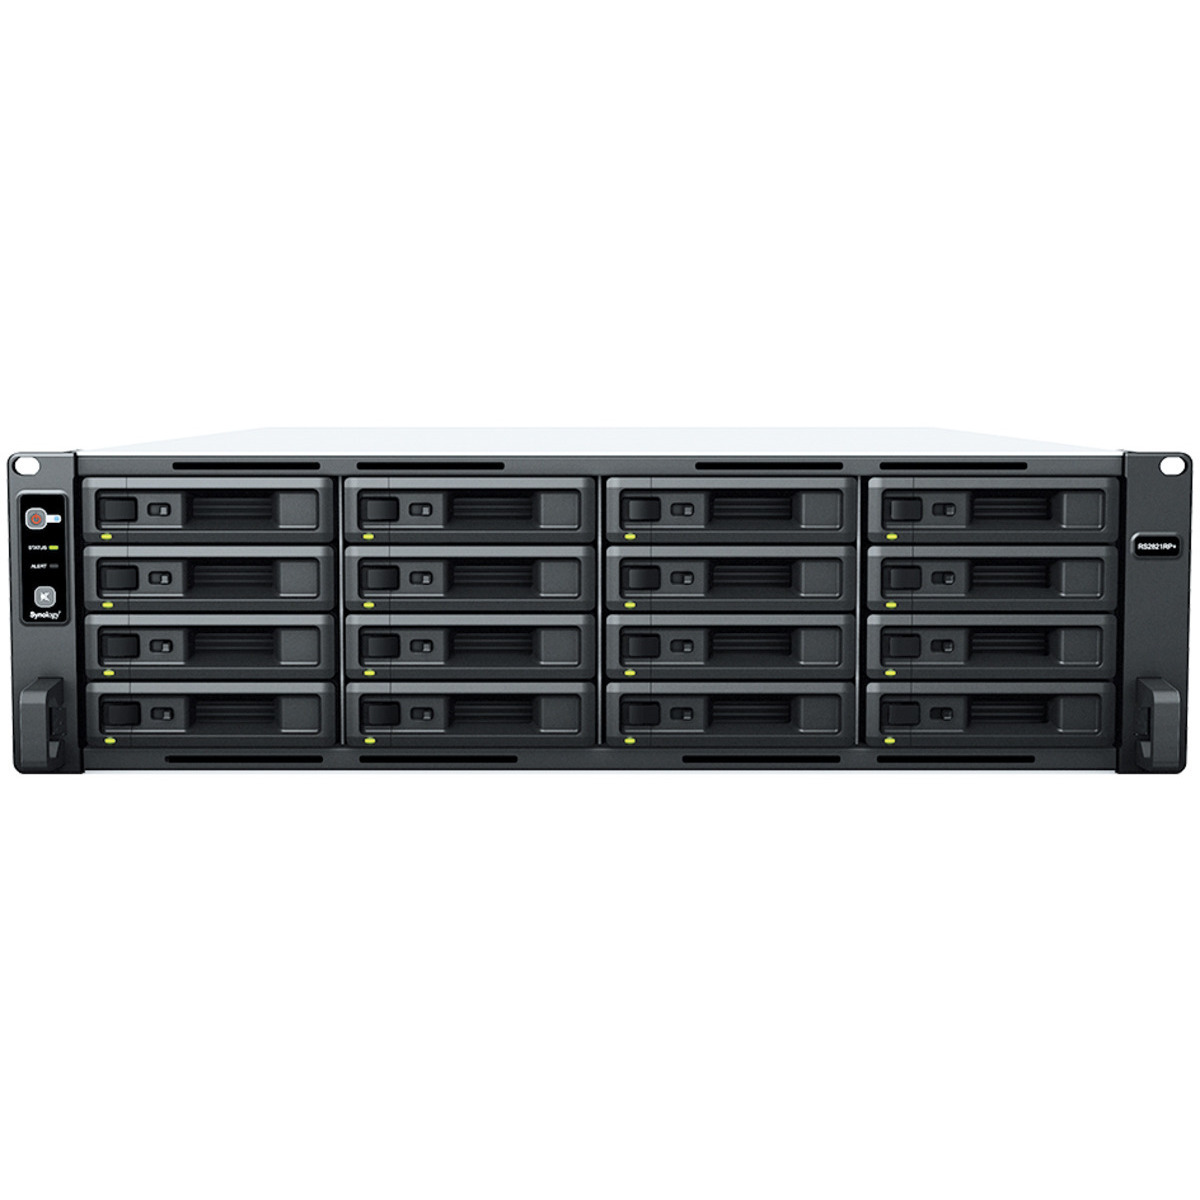 buy $9207 Synology RackStation RS2821RP+ 256tb RackMount NAS - Network Attached Storage Device 16x16000gb Toshiba Enterprise Capacity MG08ACA16TE 3.5 7200rpm SATA 6Gb/s HDD ENTERPRISE Class Drives Installed - Burn-In Tested - nas headquarters buy network attached storage server device das new raid-5 free shipping usa RackStation RS2821RP+